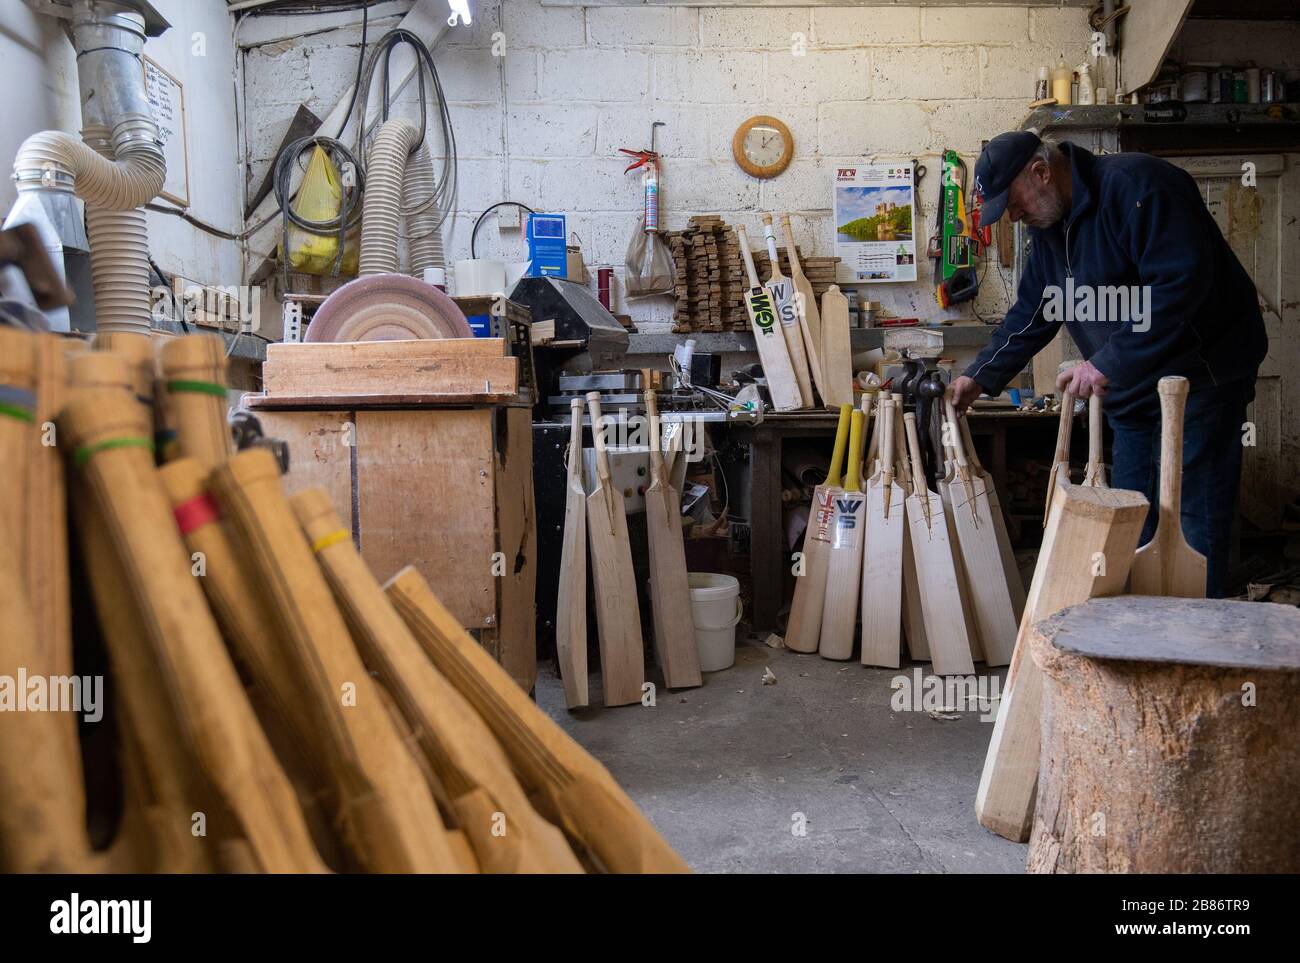 Batmaker Tony Sains crafts a handmade cricket bat at a workshop at Warsop Stebbing in East Hanningfield, Essex. With the start of the season just weeks away, the ECB, the governing body of cricket have recommend that all forms of recreational cricket are for now suspended. Stock Photo